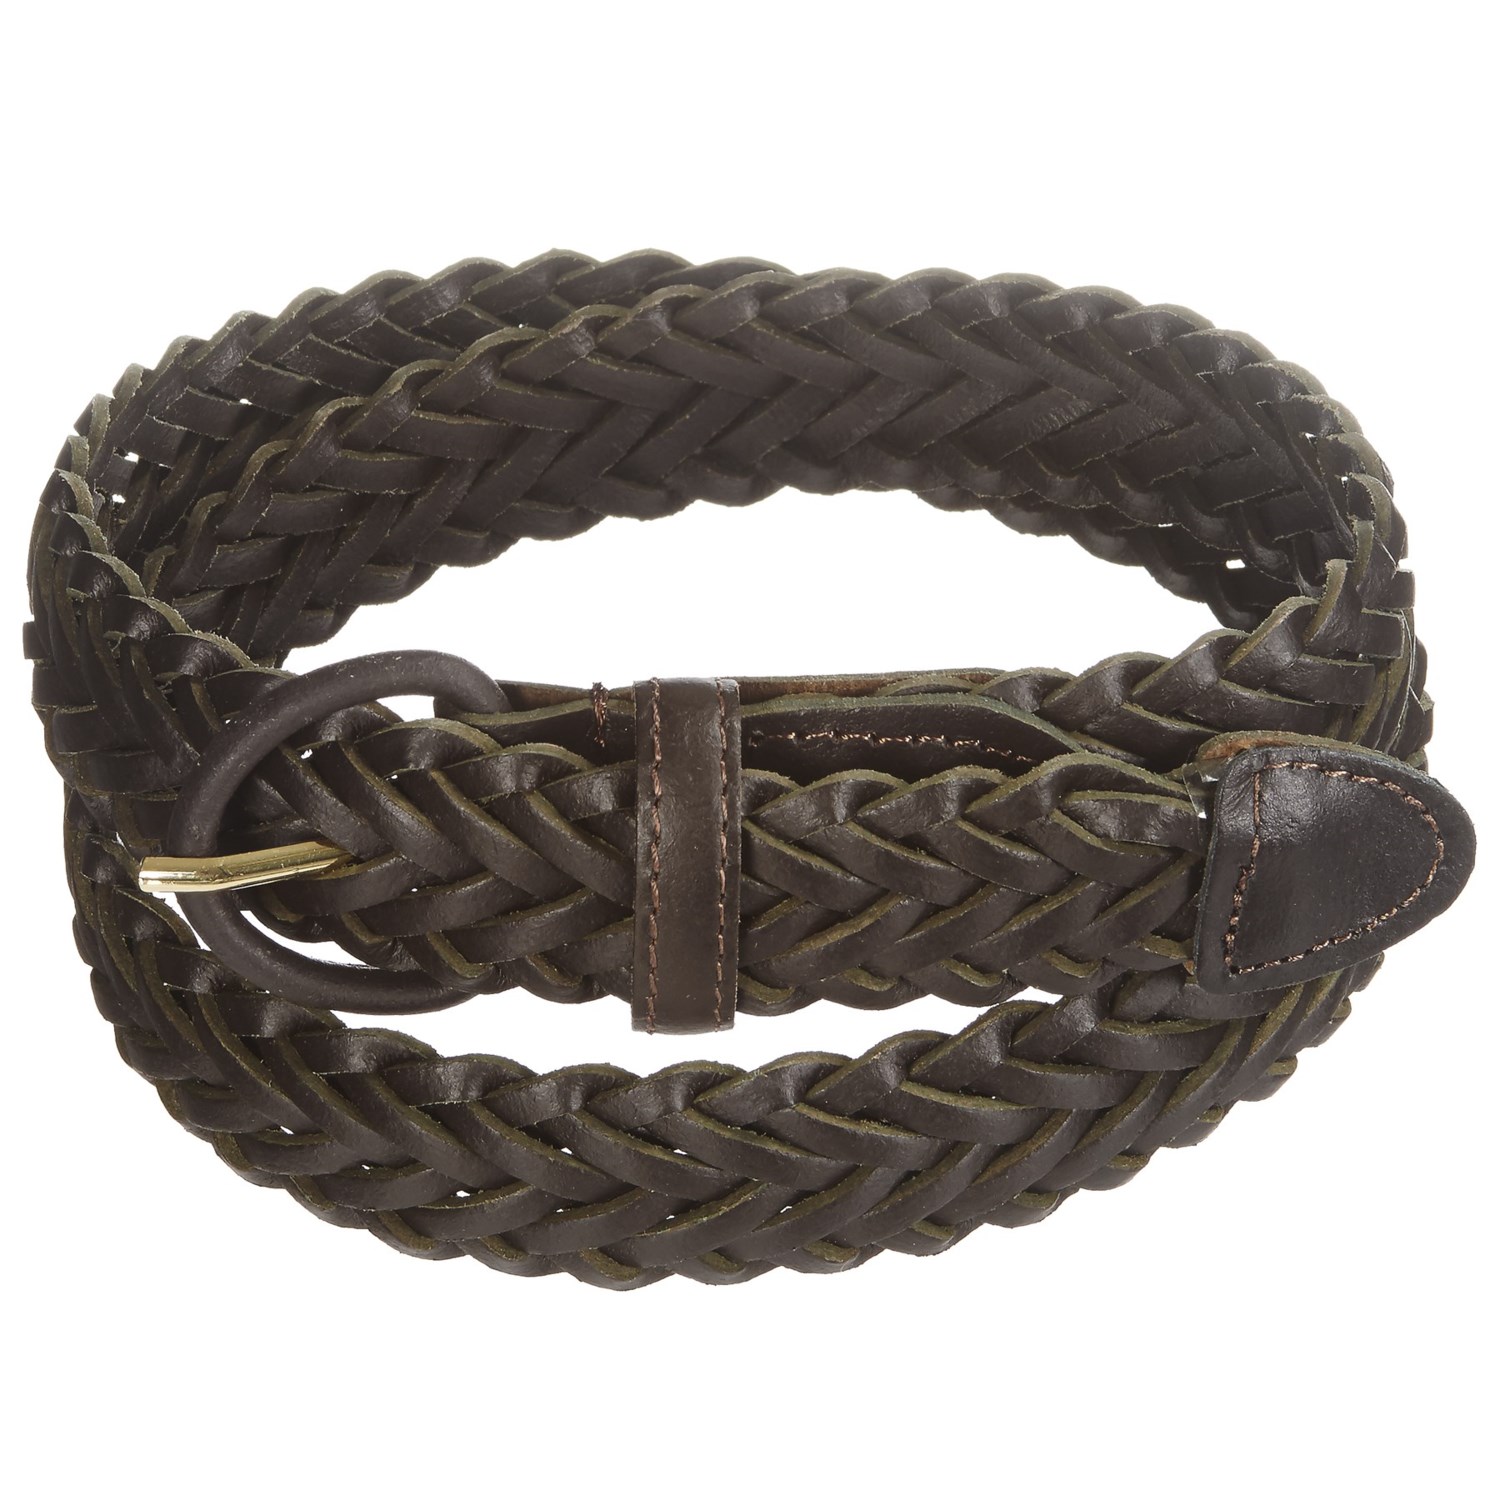 American Endurance Braided Leather Belt (For Men) - Save 60%